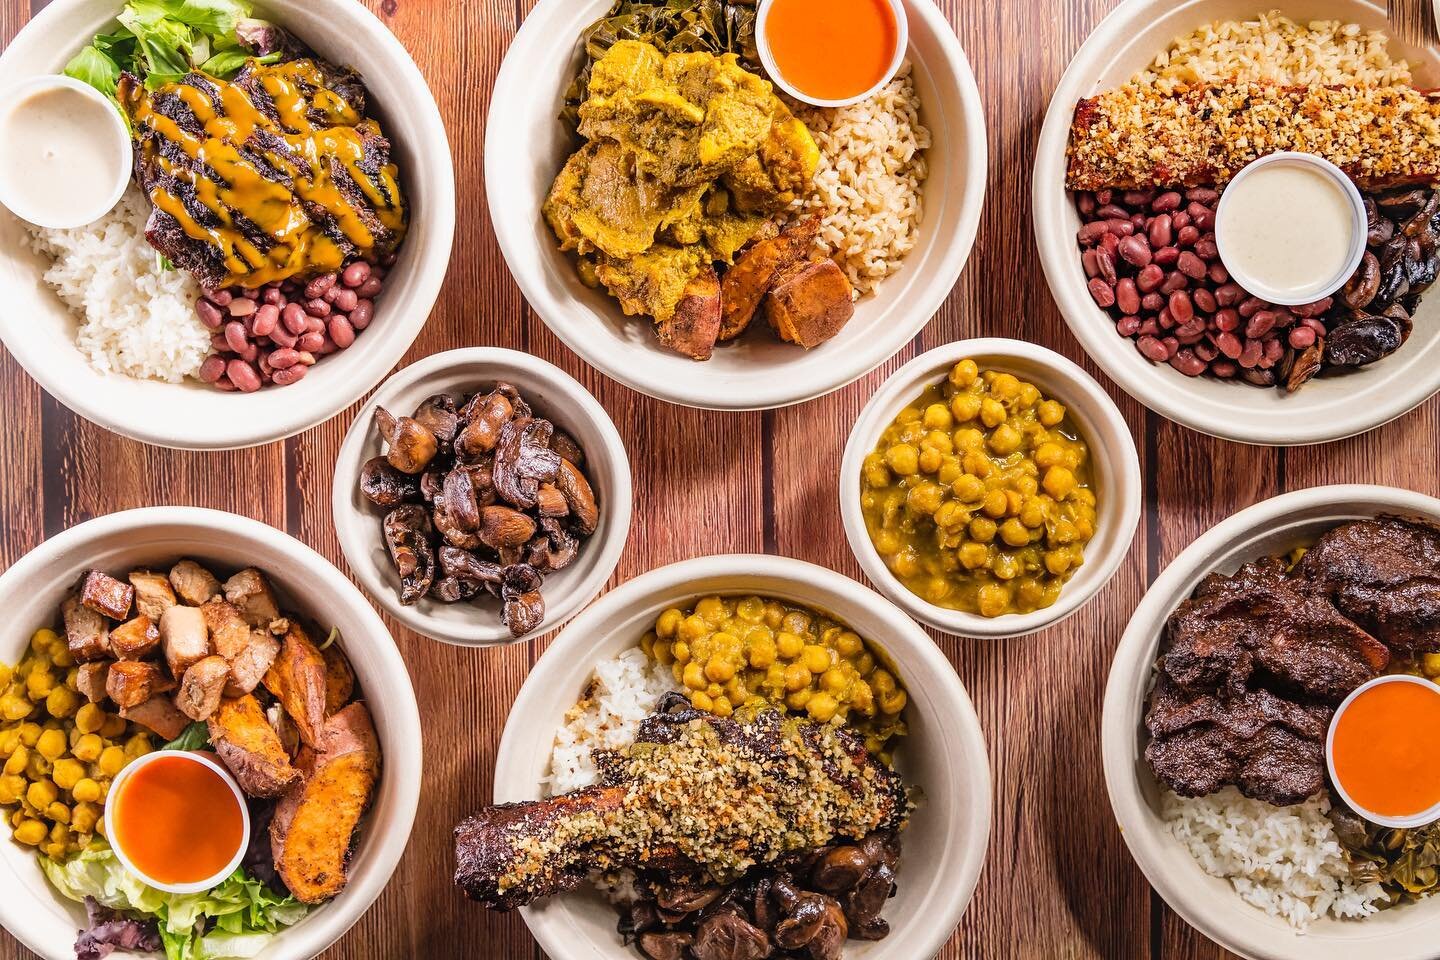 What&rsquo;s for Lunch? Some of your favorites available for takeout or delivery via Grubhub. Available from 11am to 4pm Monday to Friday. #oxtails #currychicken #tofu #spicychicken #salmon